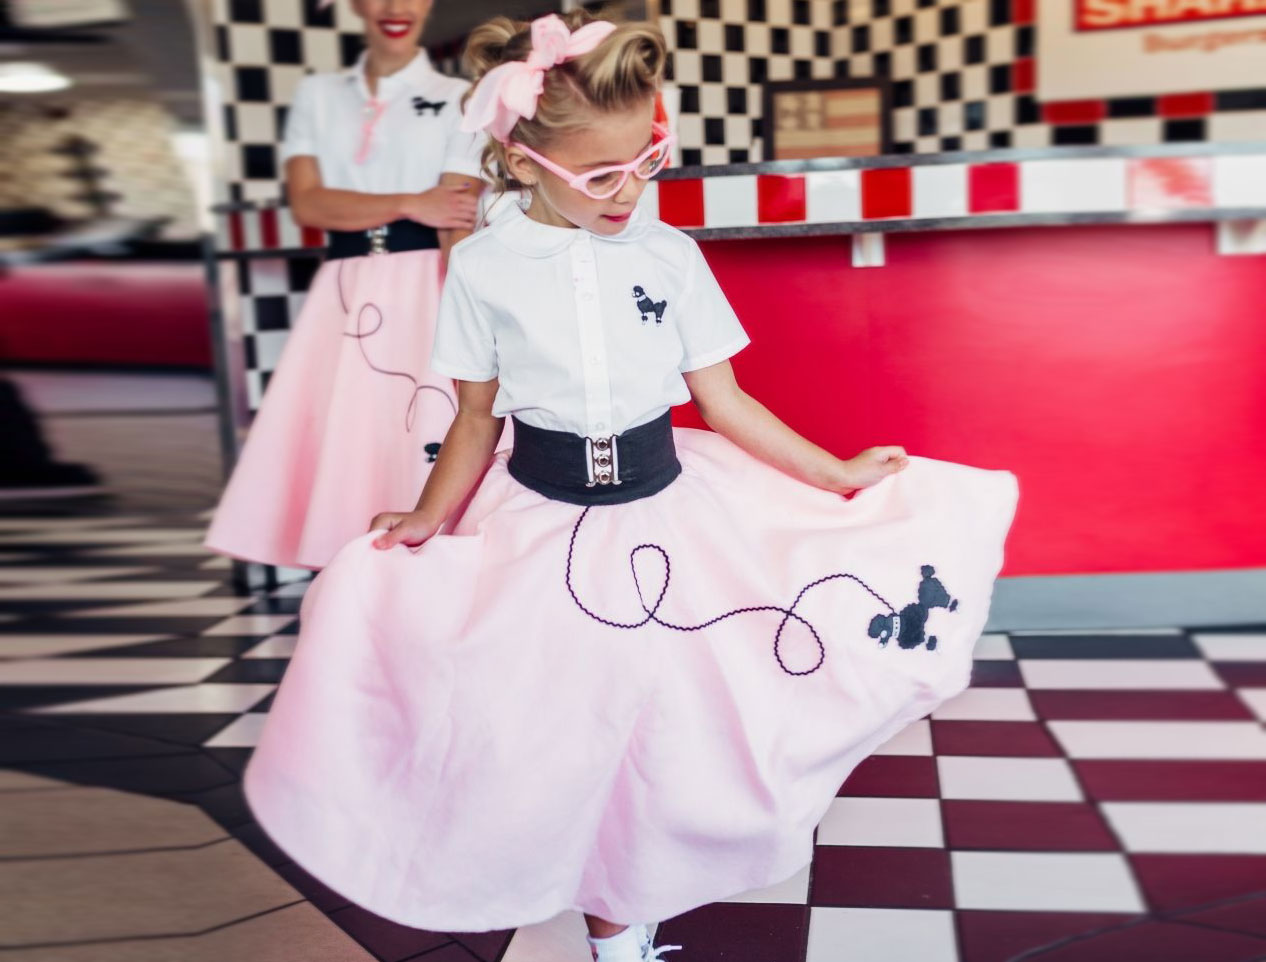 50's Outfits For Every Occassion | Poodle Skirts, Poodle Tops, & More